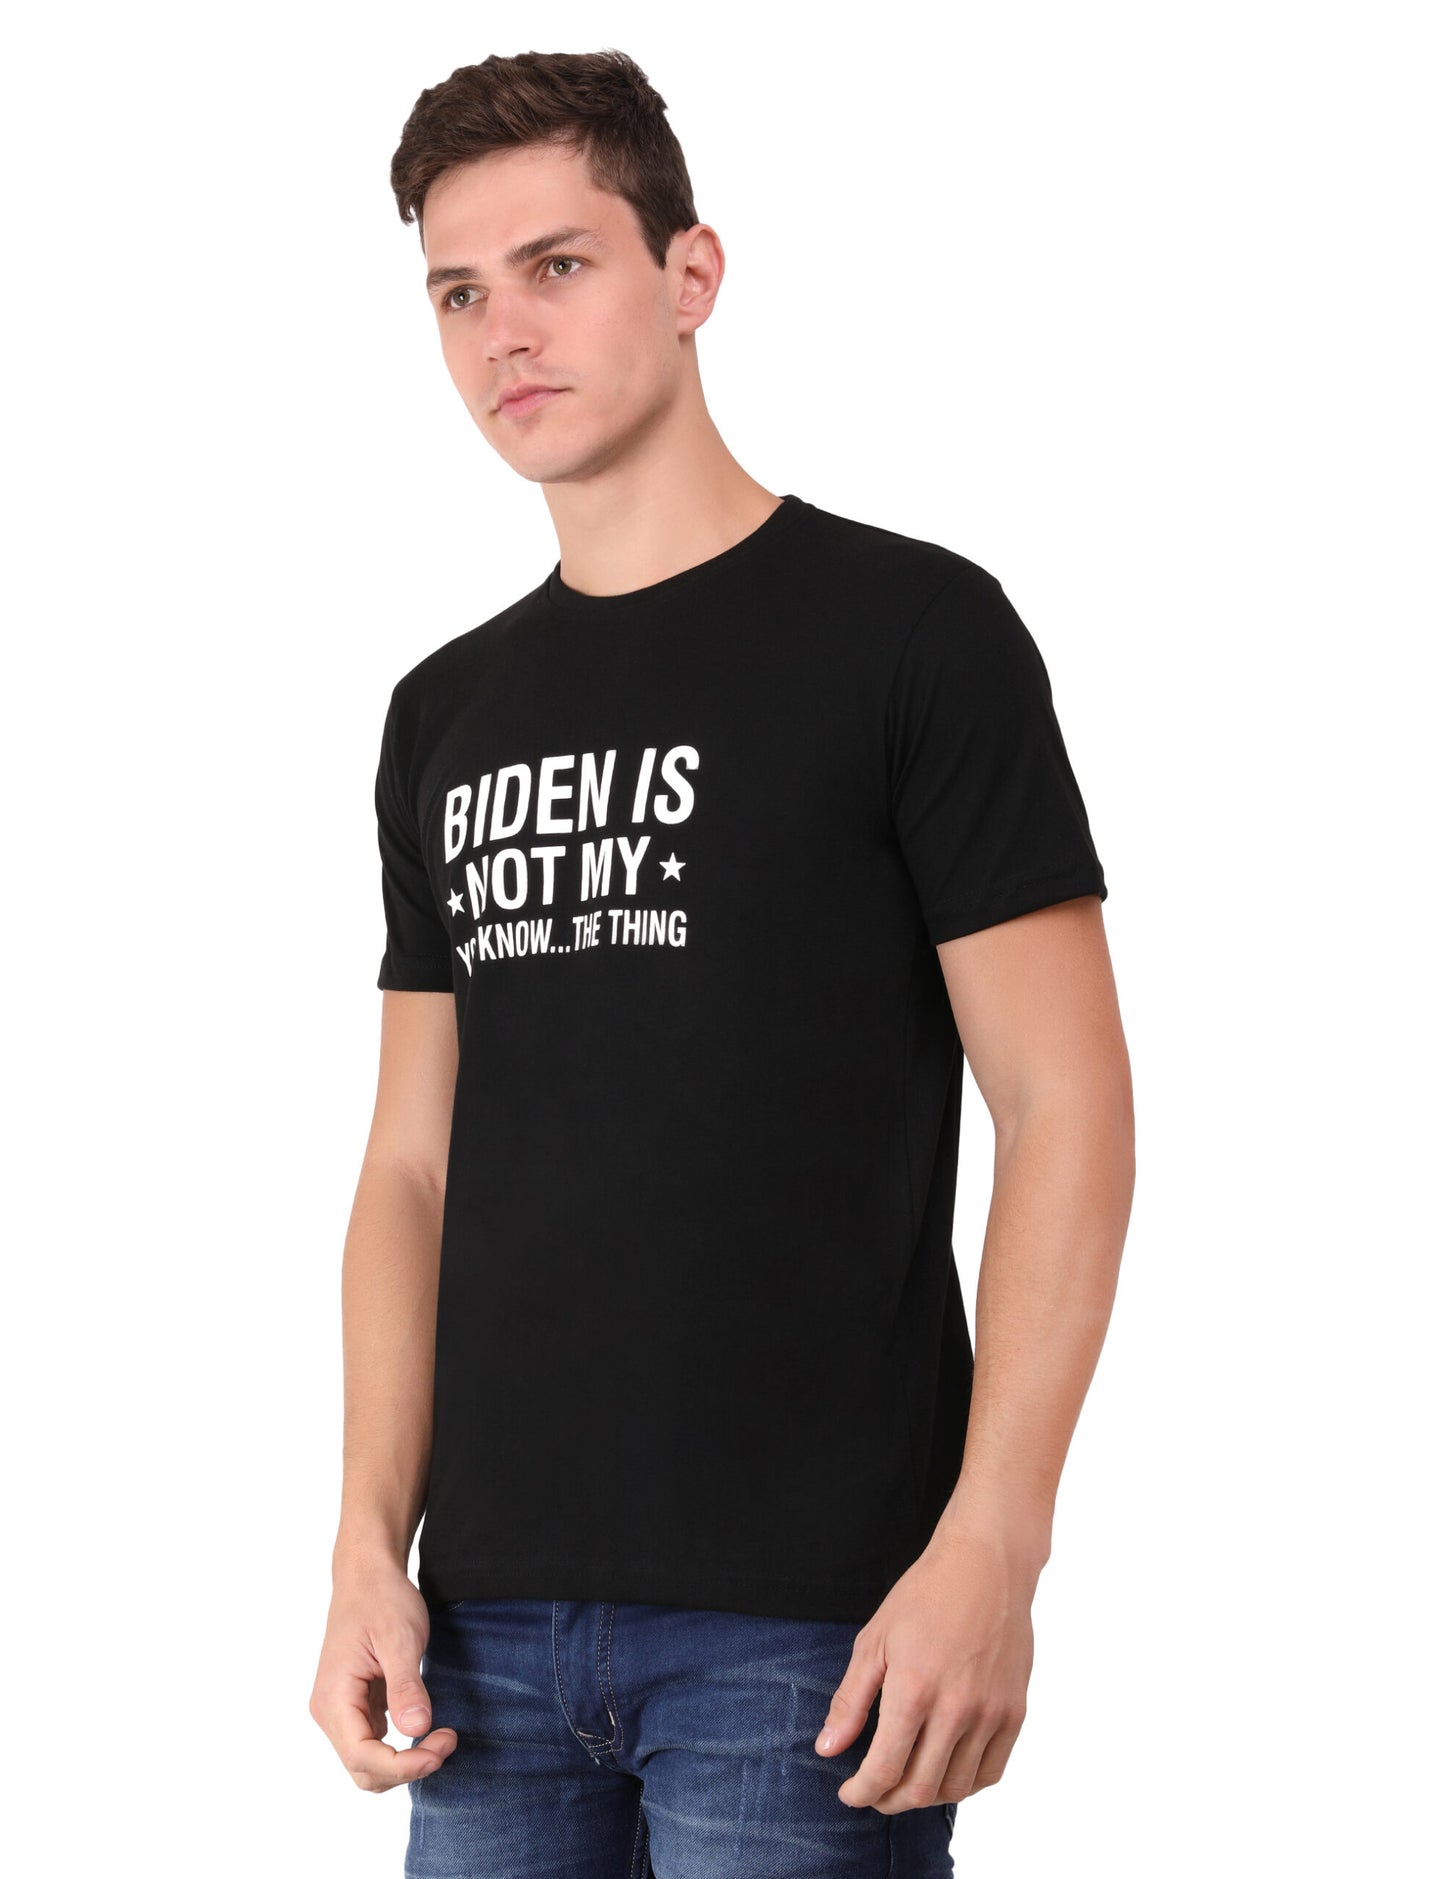 Biden Is *Not My* You Know…The Thing Authentic Cotton Black T-Shirt